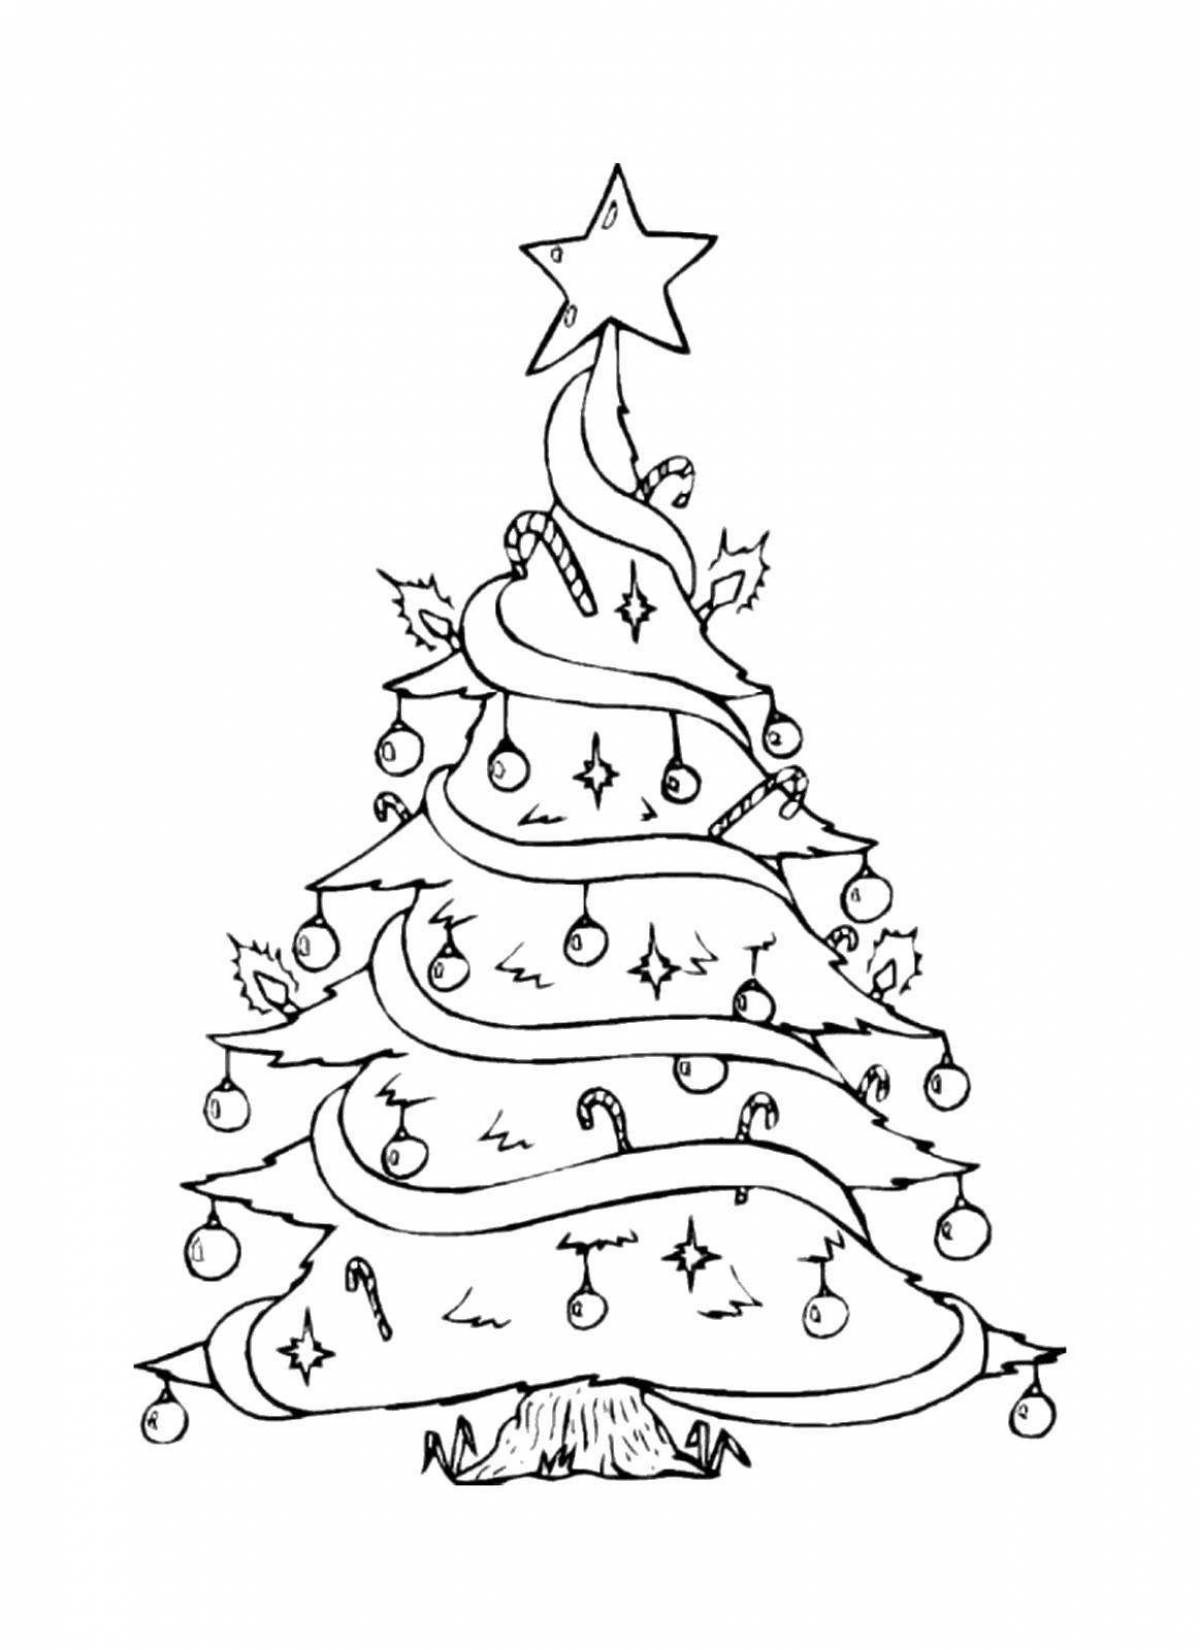 Coloring book big Christmas tree for children 4-5 years old